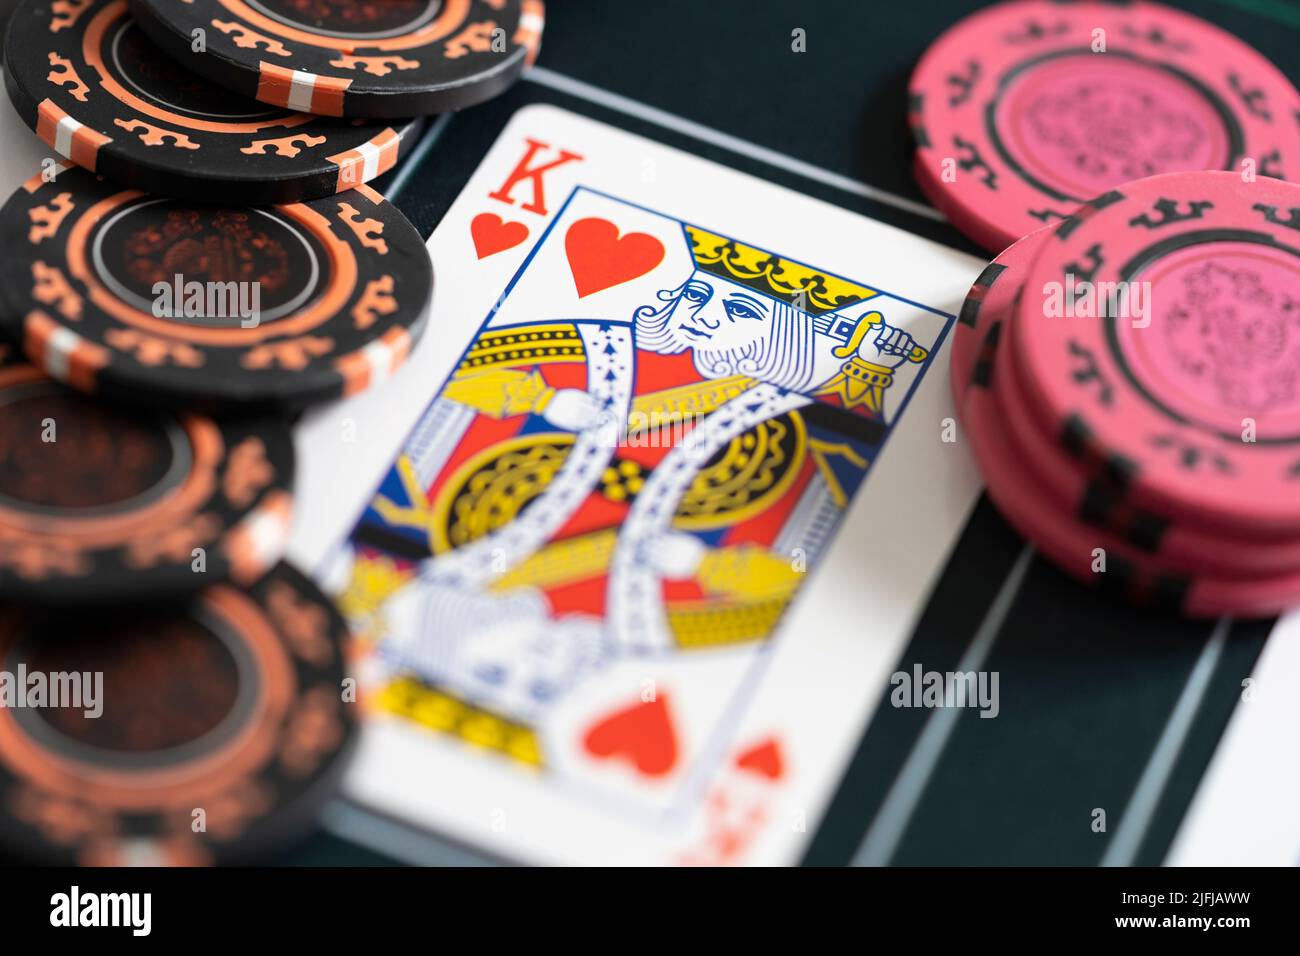 Closeup of a king of hearts playing card and poker betting chips on a poker mat. Concept - poker strategy, gambling, betting, gambling addiction Stock Photo